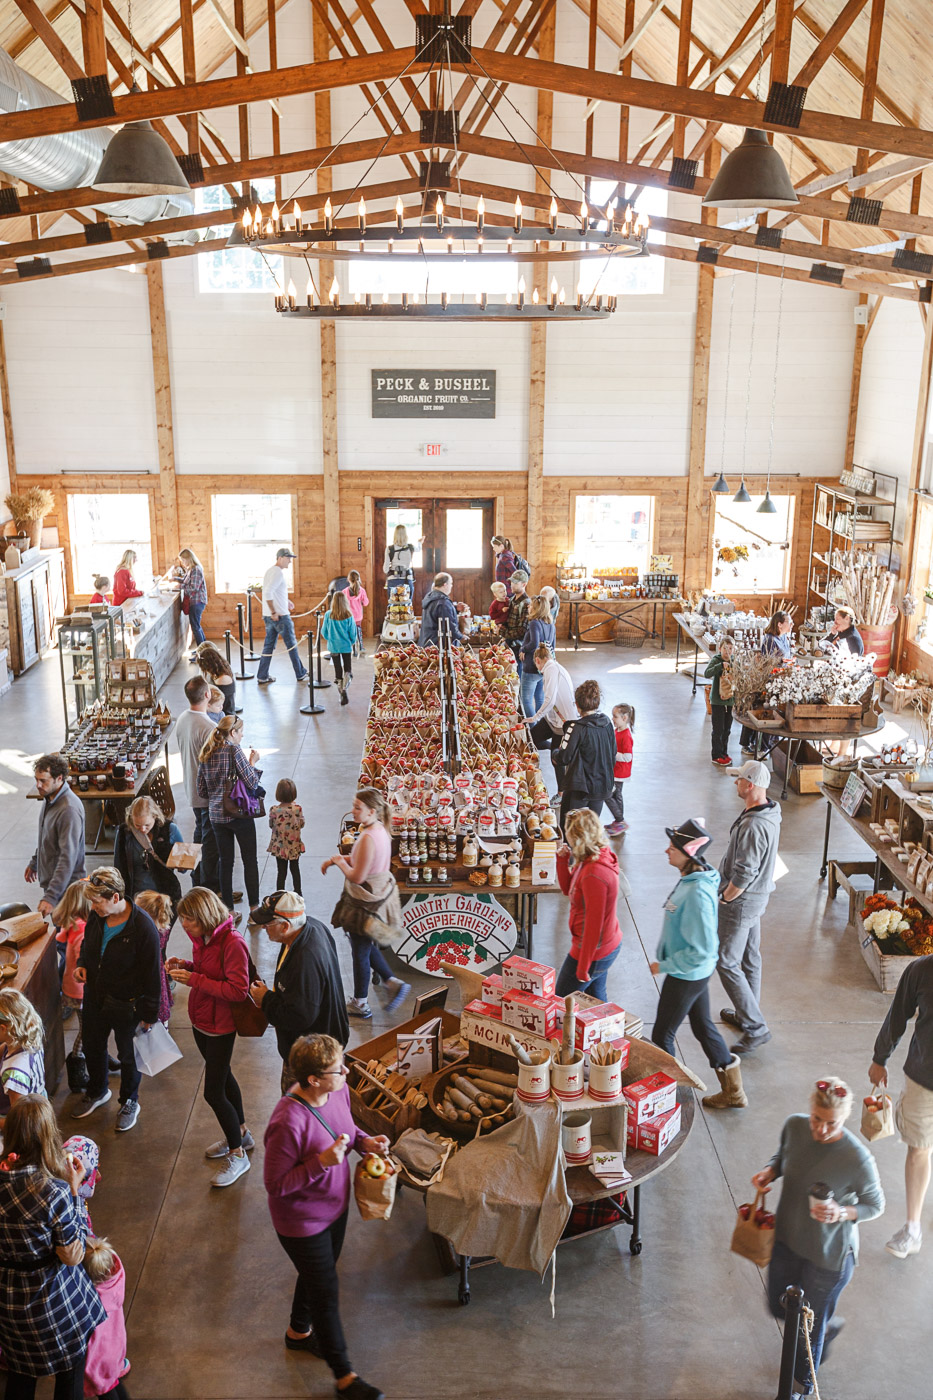 Peck and Bushel Organic Orchard and Barn in Colgate, Wisconsin, September 2018